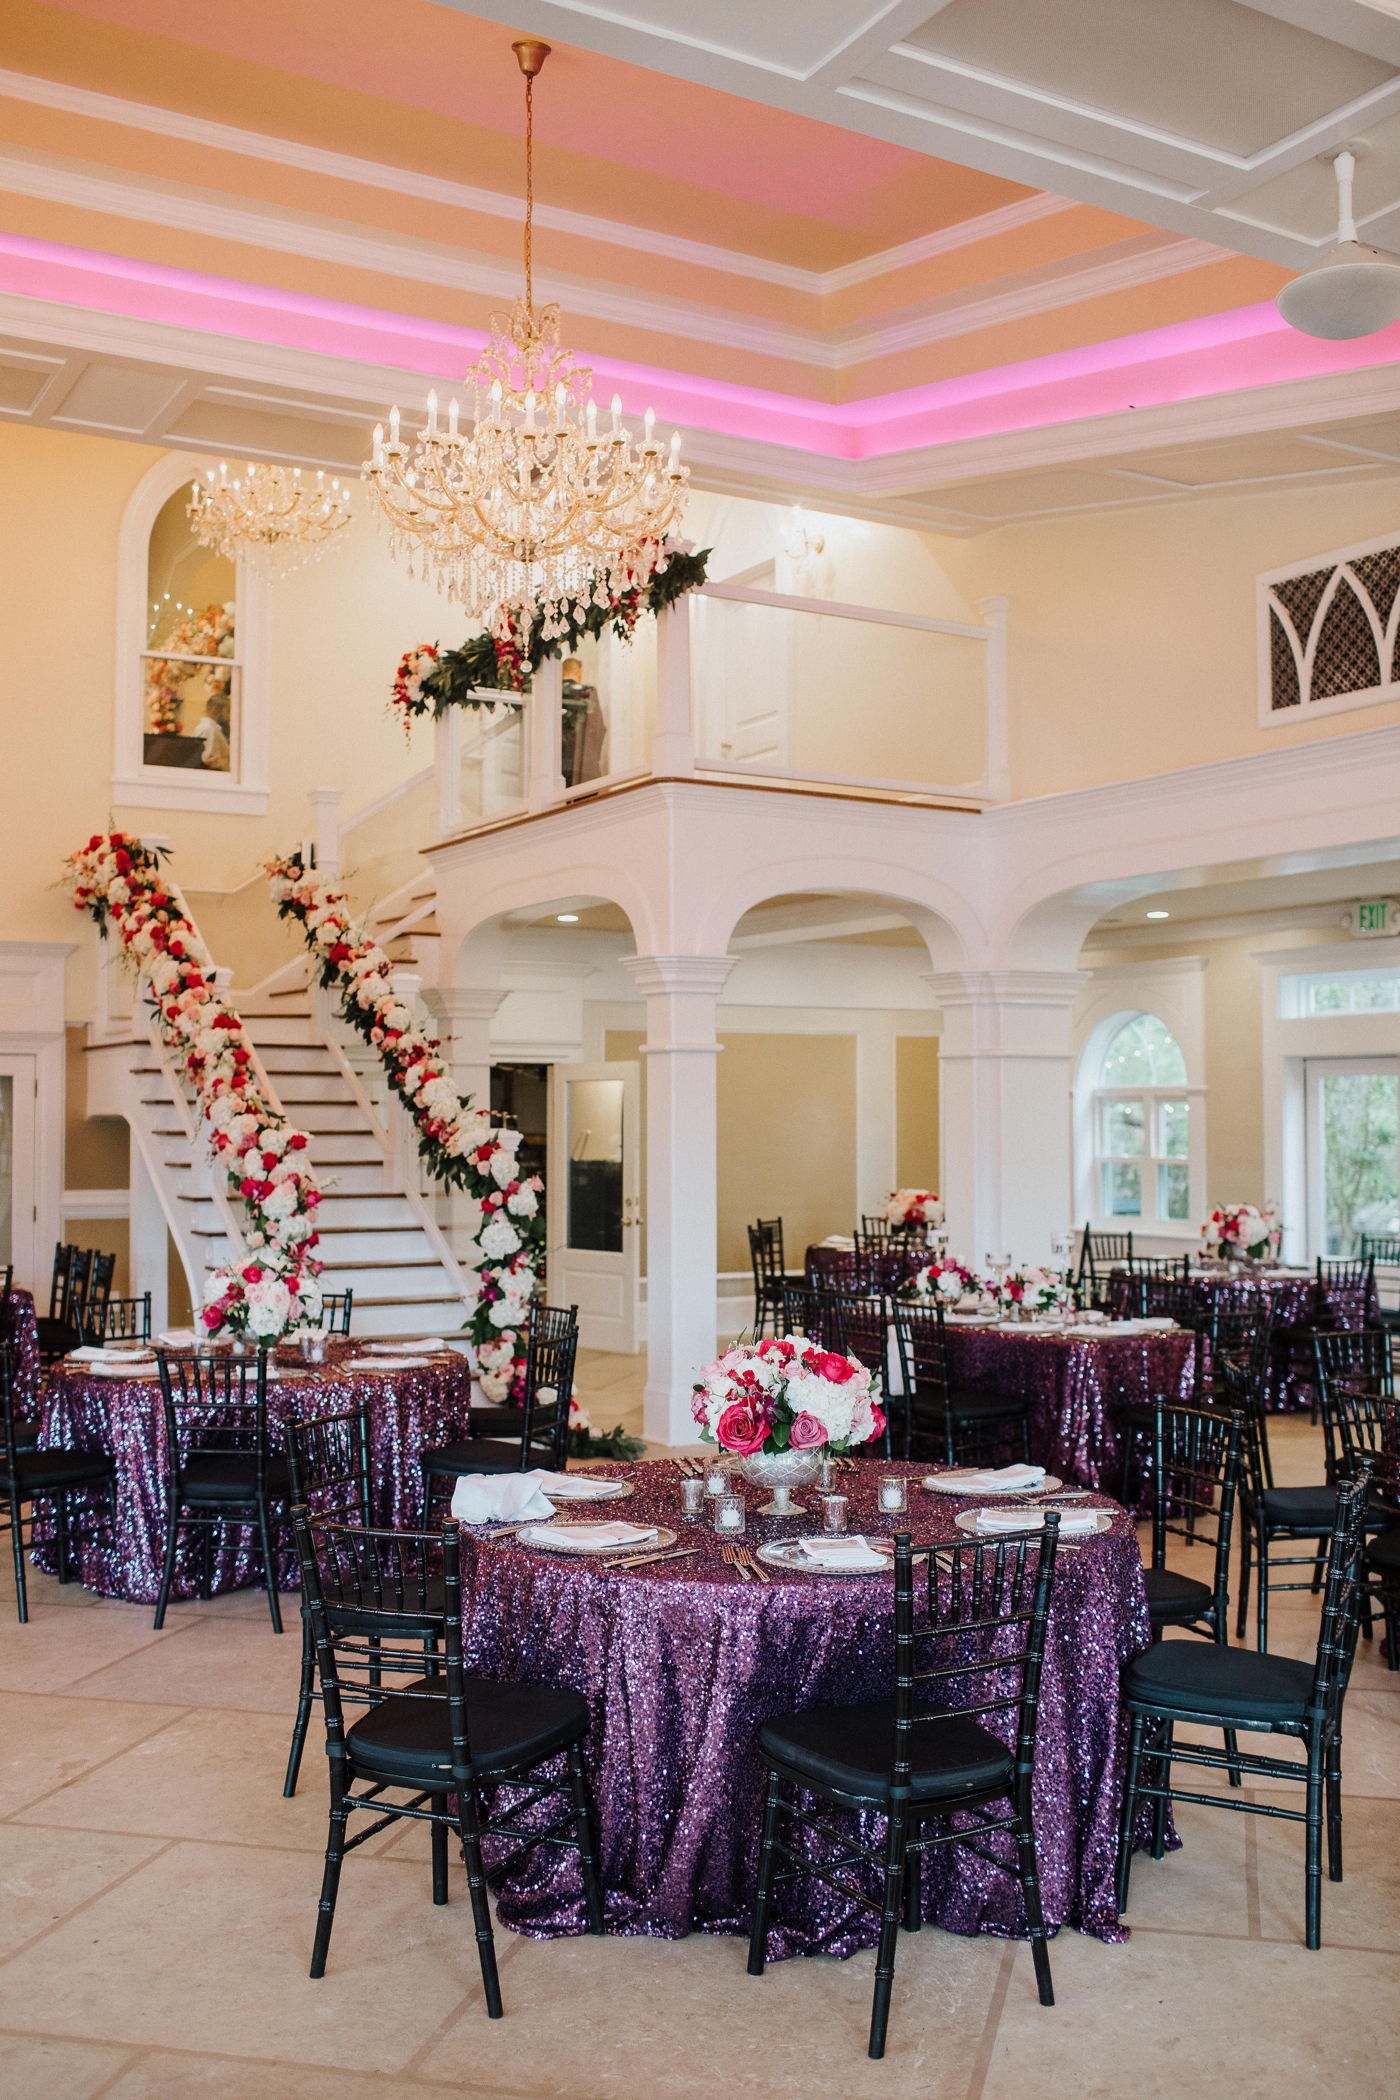 Hot pink and blush wedding at Tybee Island Wedding Chapel | Izzy and Co.